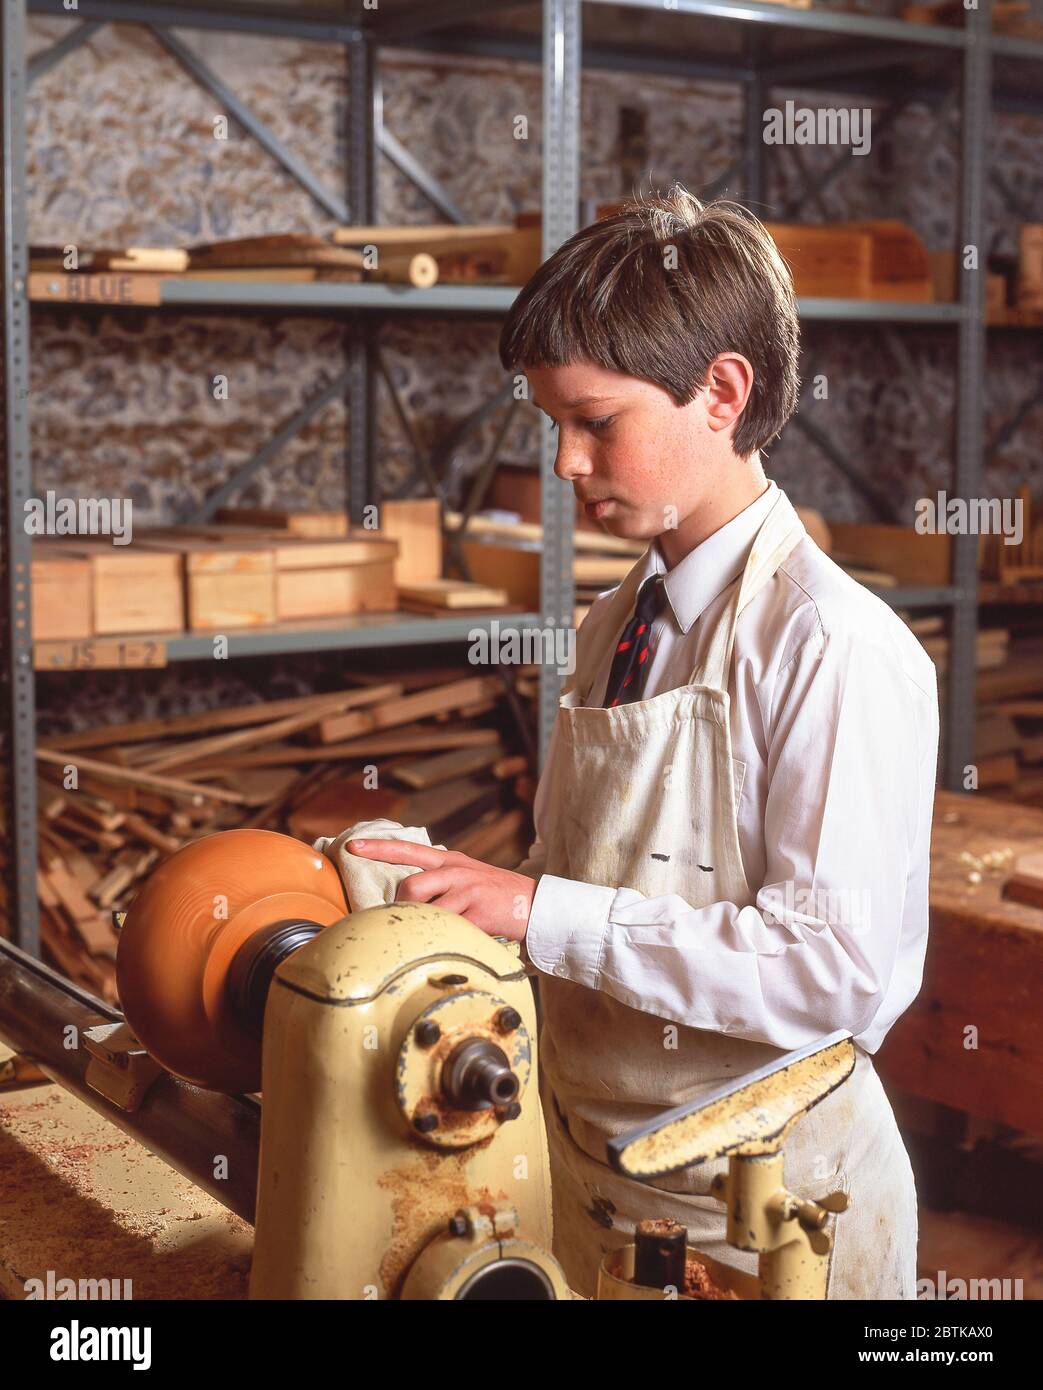 Young boy using lathe in woodworking class, Surrey, England, United Kingdom Stock Photo